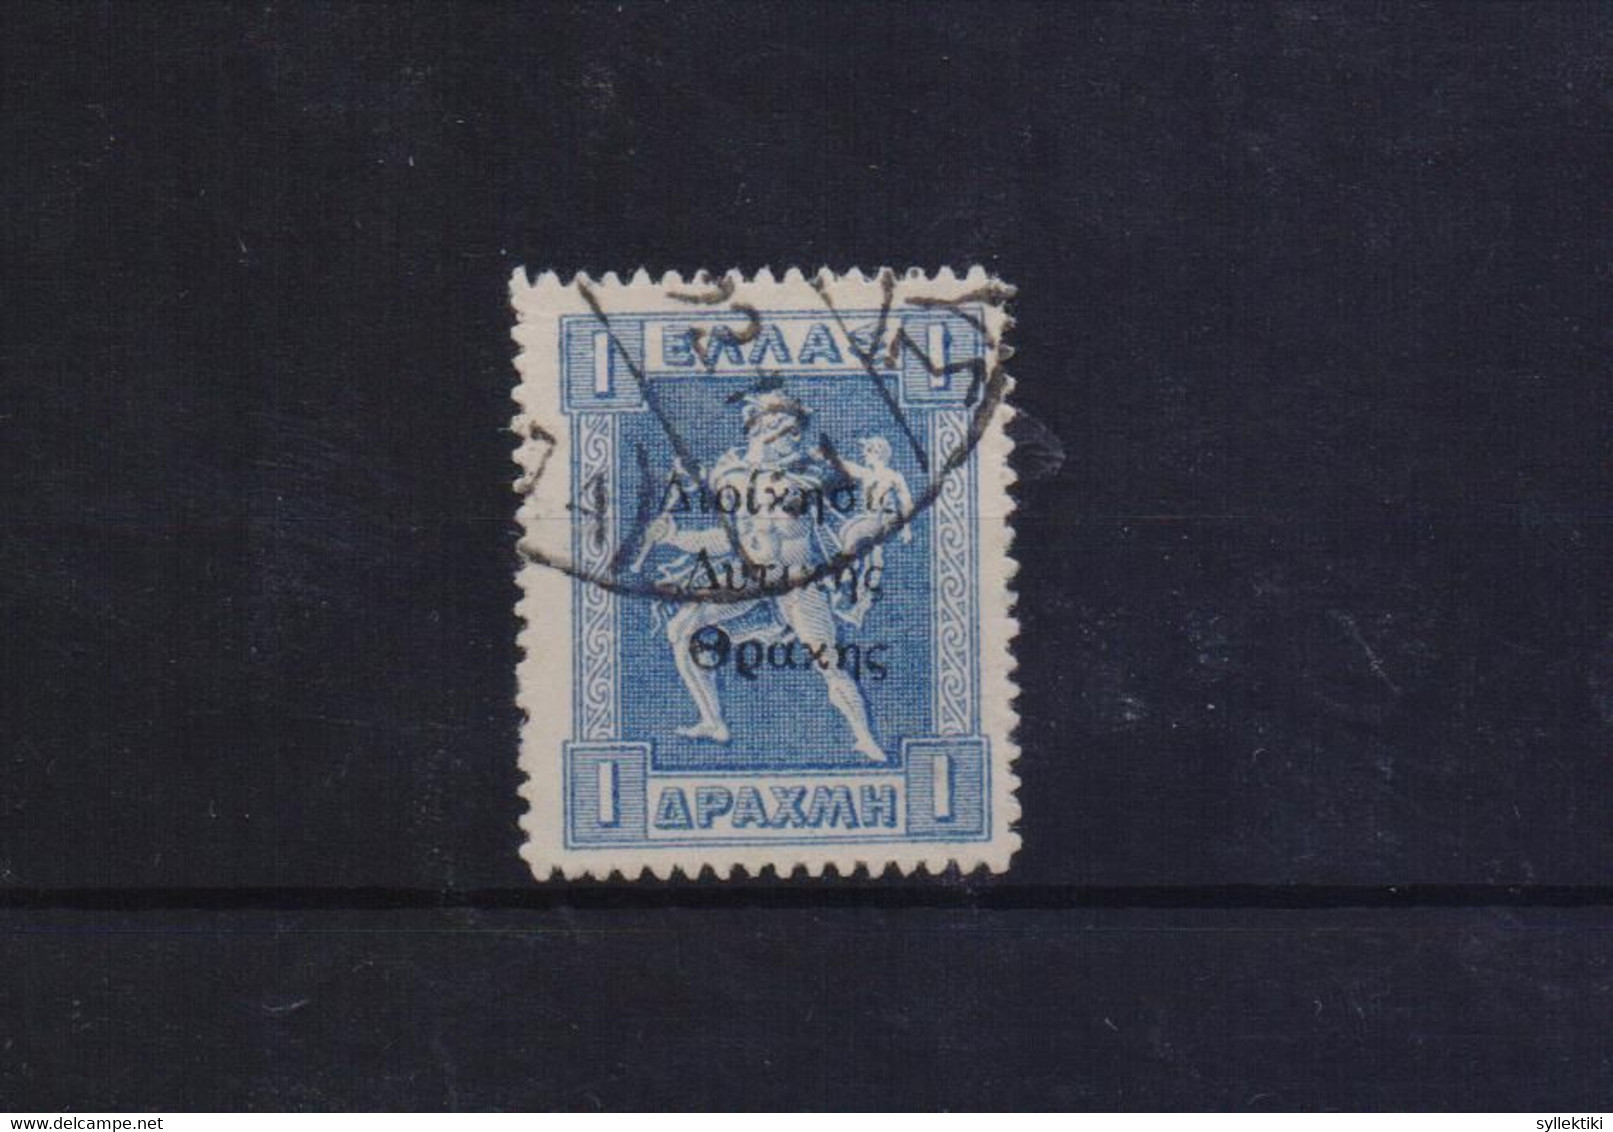 GREECE 1920 THRACE ADMINISTRATION 1 DRACHMA USED STAMP HELLAS CAT. No 78 - Thracië